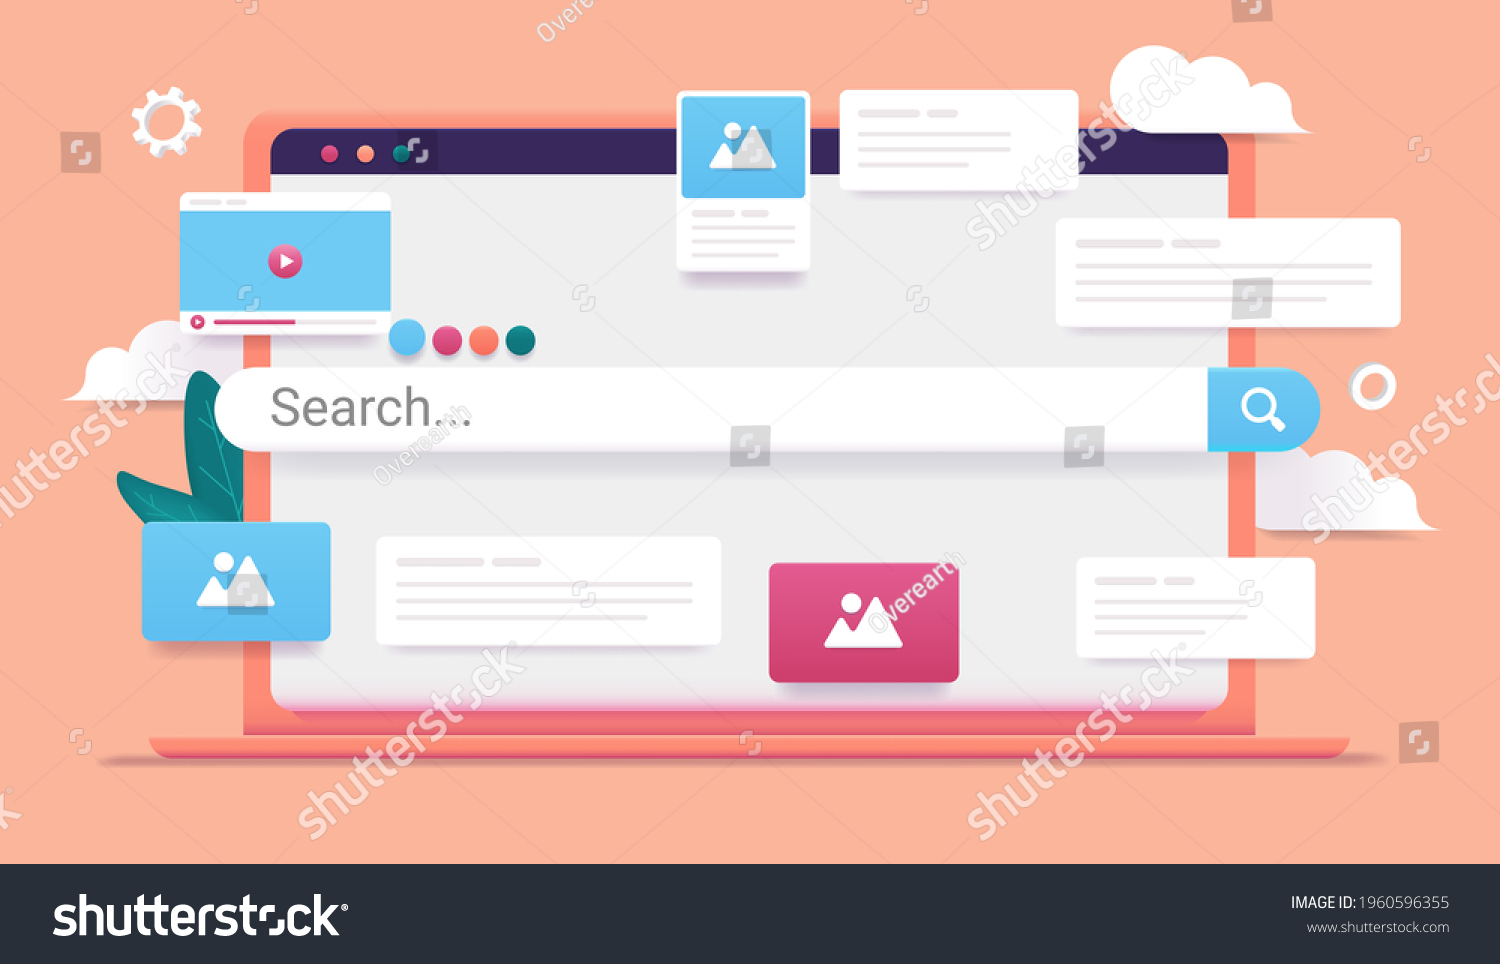 Laptop computer with search engine and web elements on screen. Online search, and seeking information on internet concept. Vector illustration. #1960596355